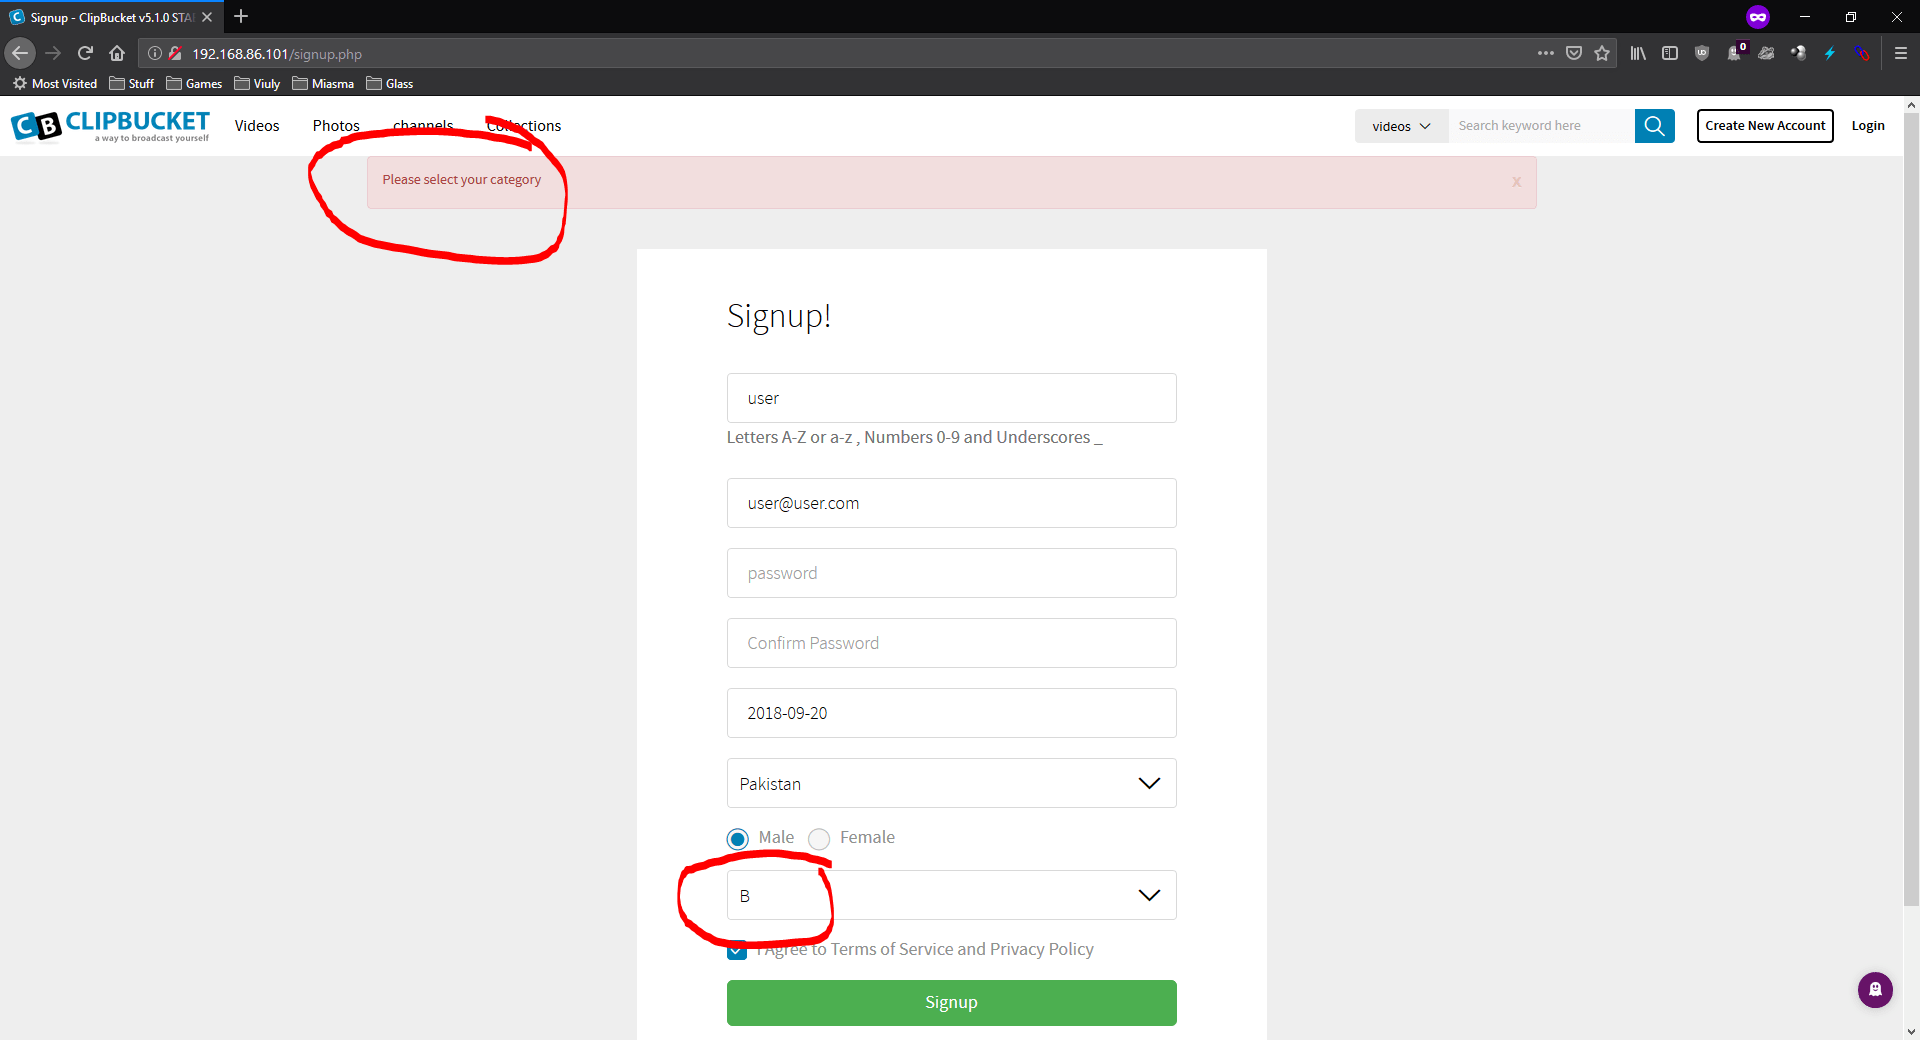 Please select your page